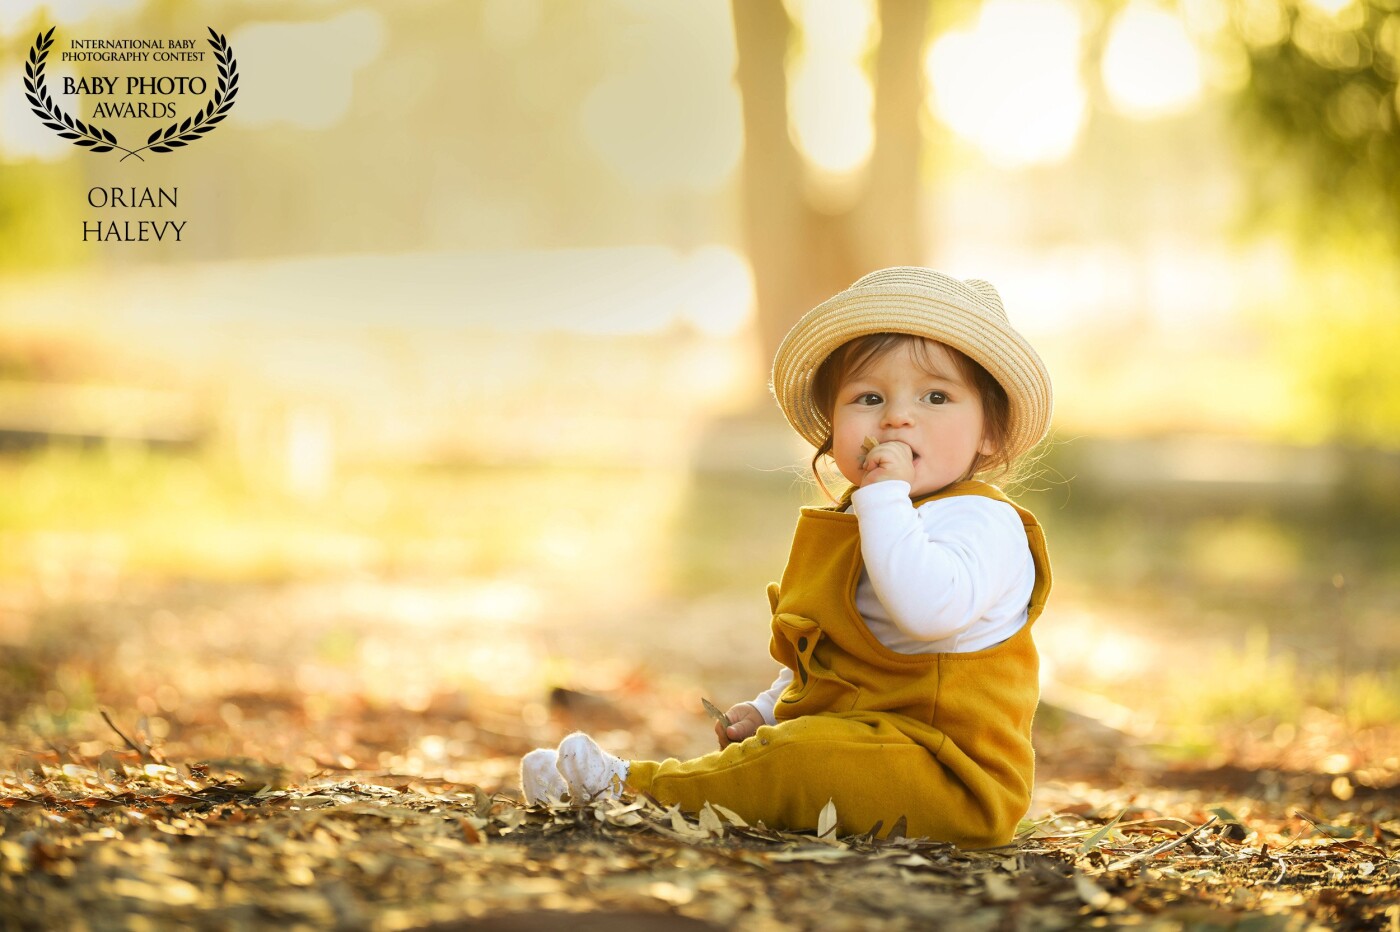 A magical moment in the golden hour.<br />
A one-year-old baby, with plump and so sweet cheeks, touches the leaves,<br />
enjoys nature and is curious about everything around.